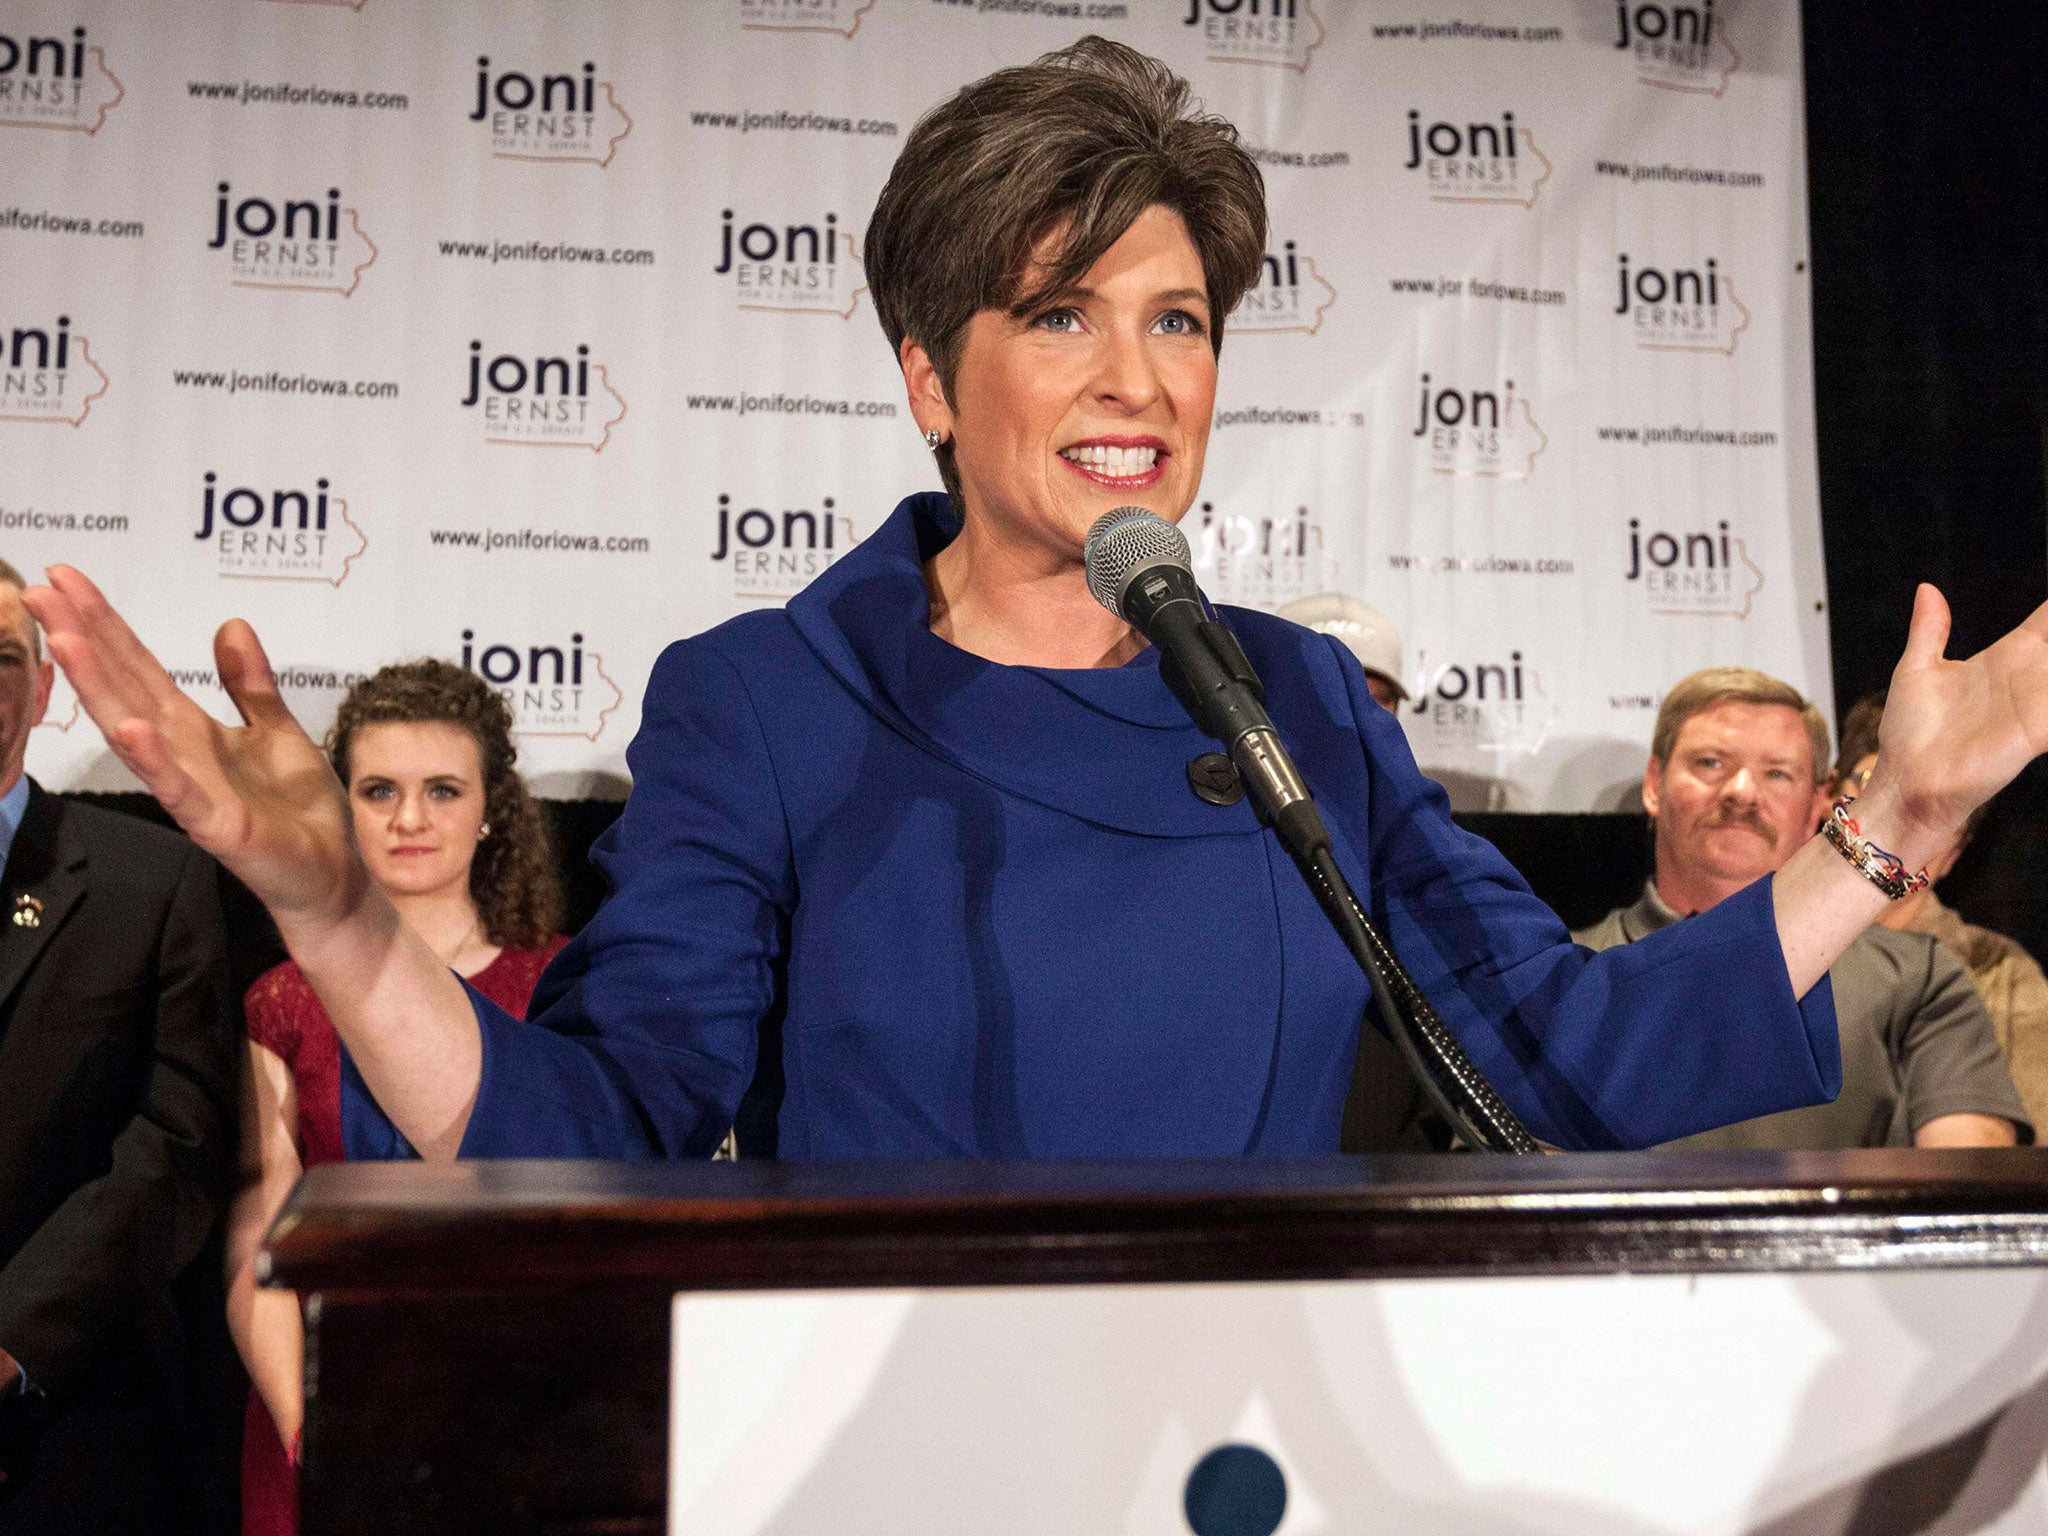 Republican Senator Joni Ernst reacts after victory in the U.S. Senate race during the U.S. midterm elections in West Des Moines, Iowa